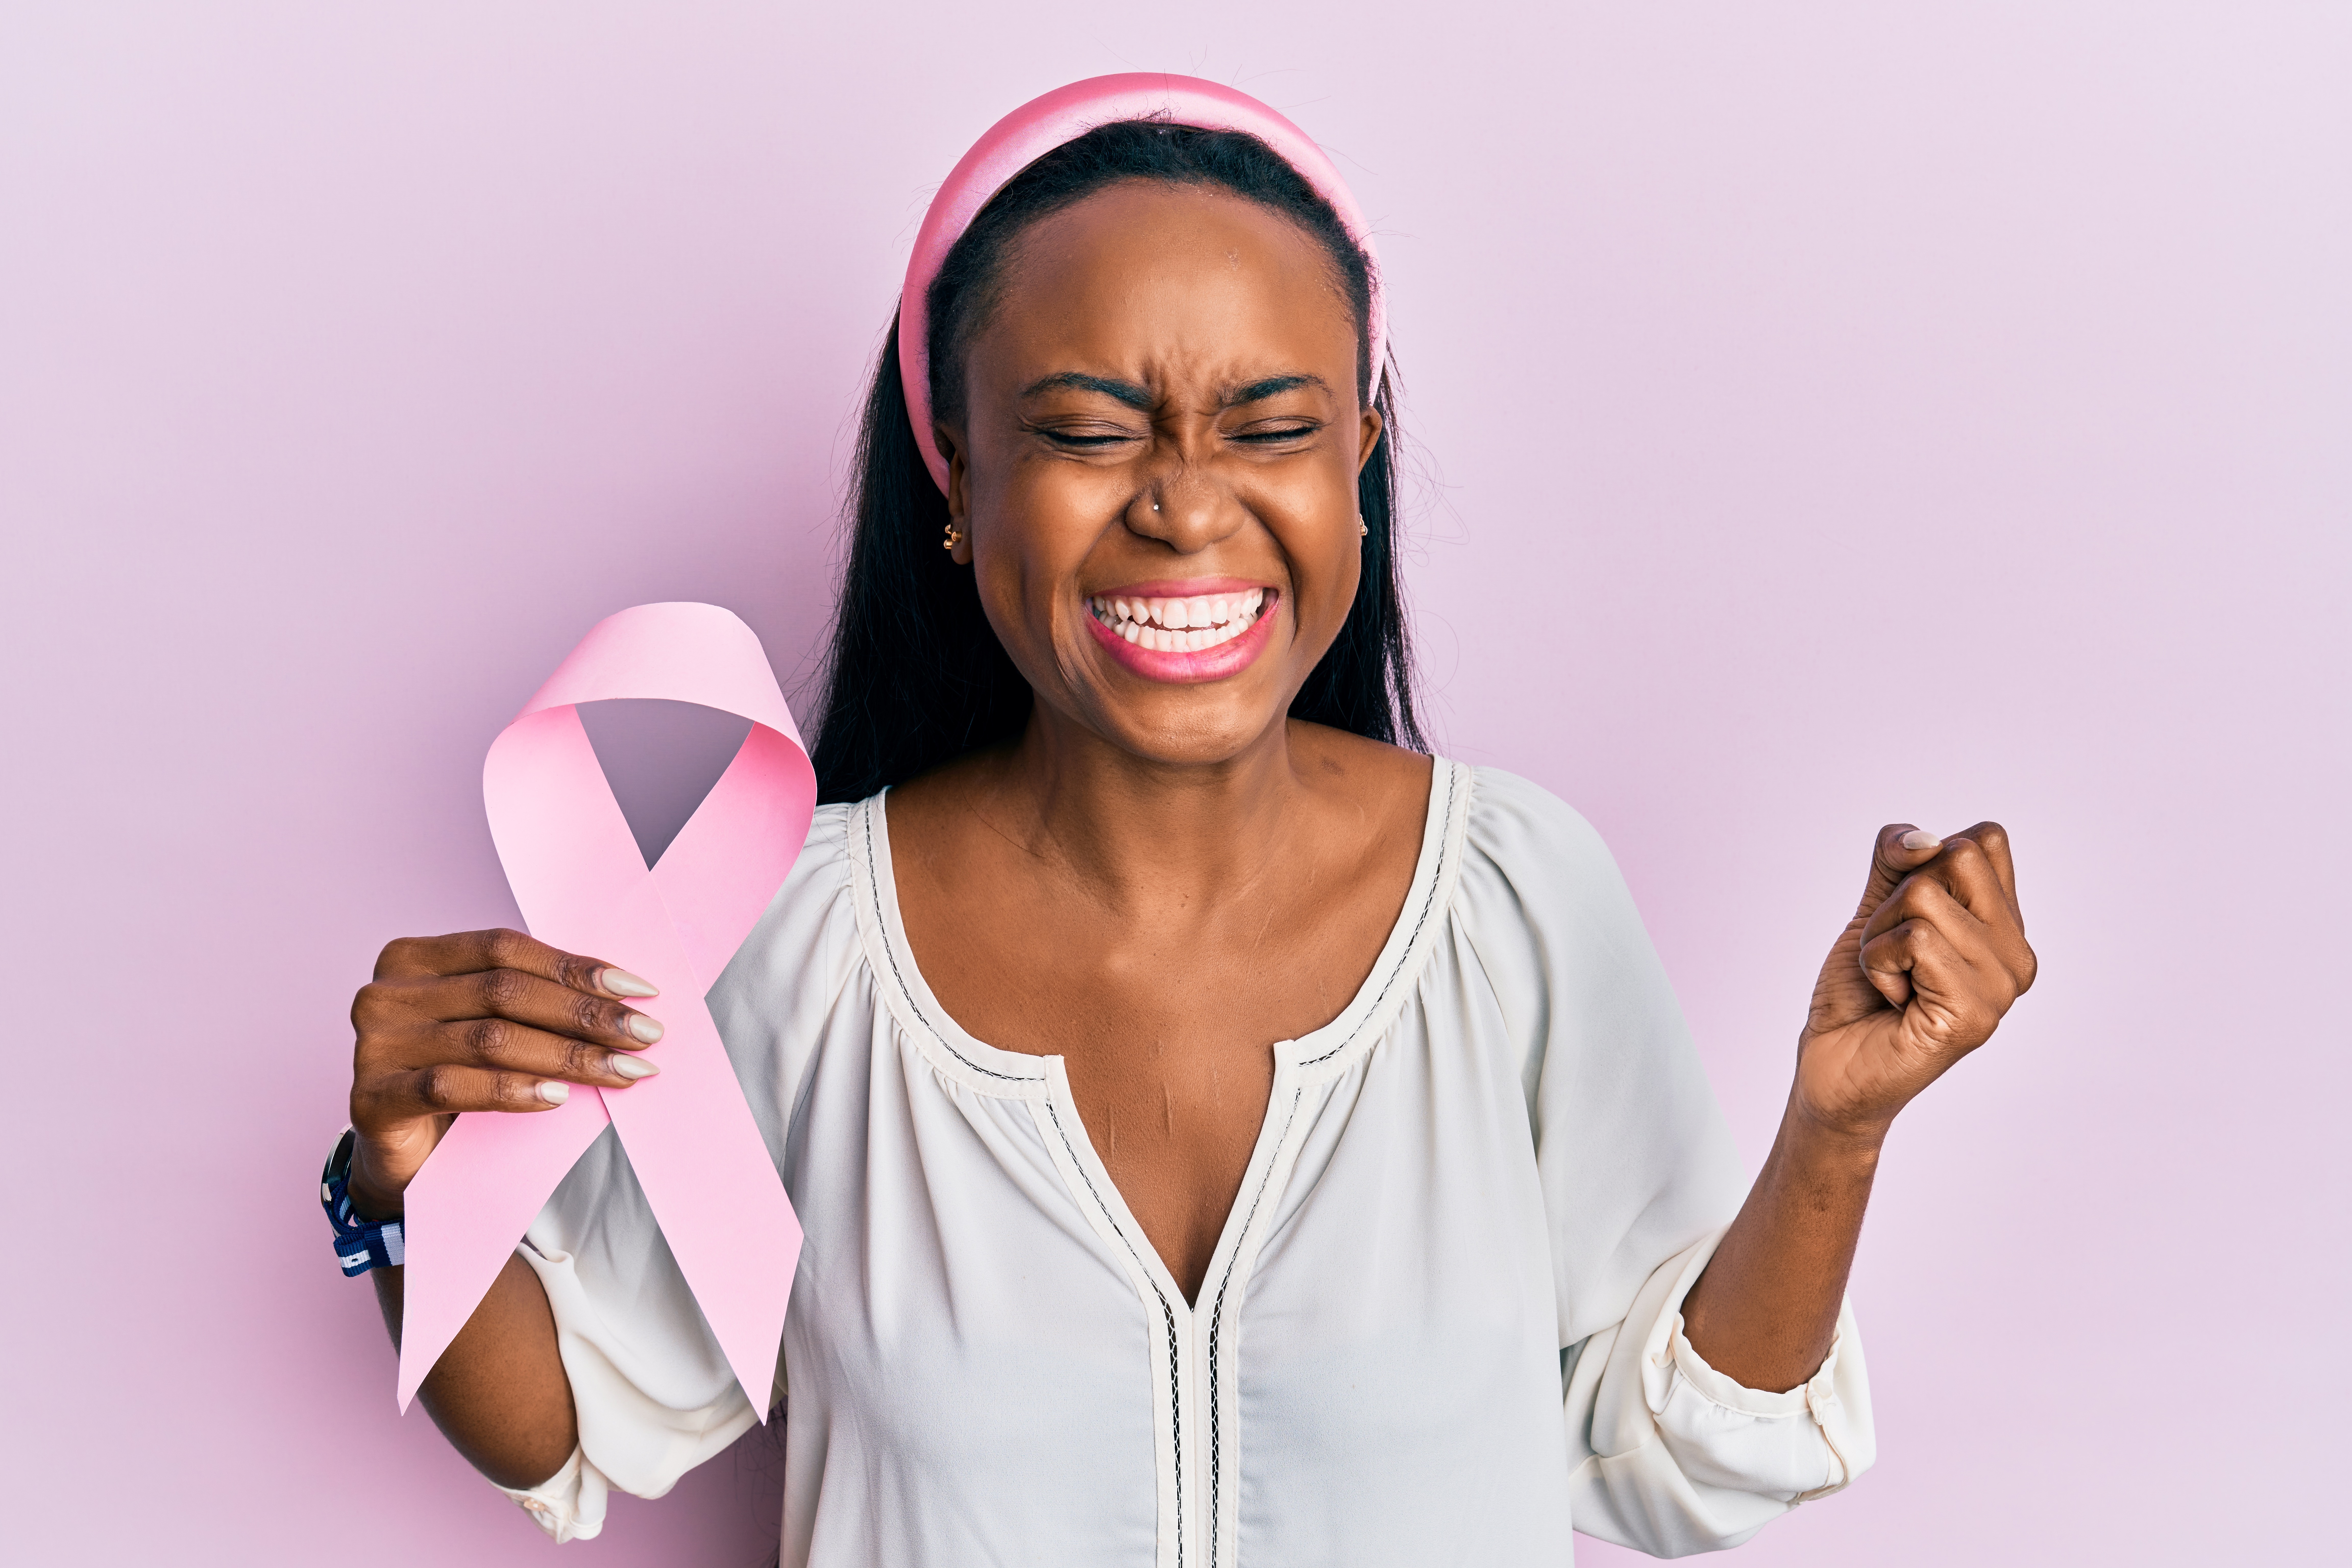 Sisters Network Inc: $350 Grants for Breast Cancer Patients